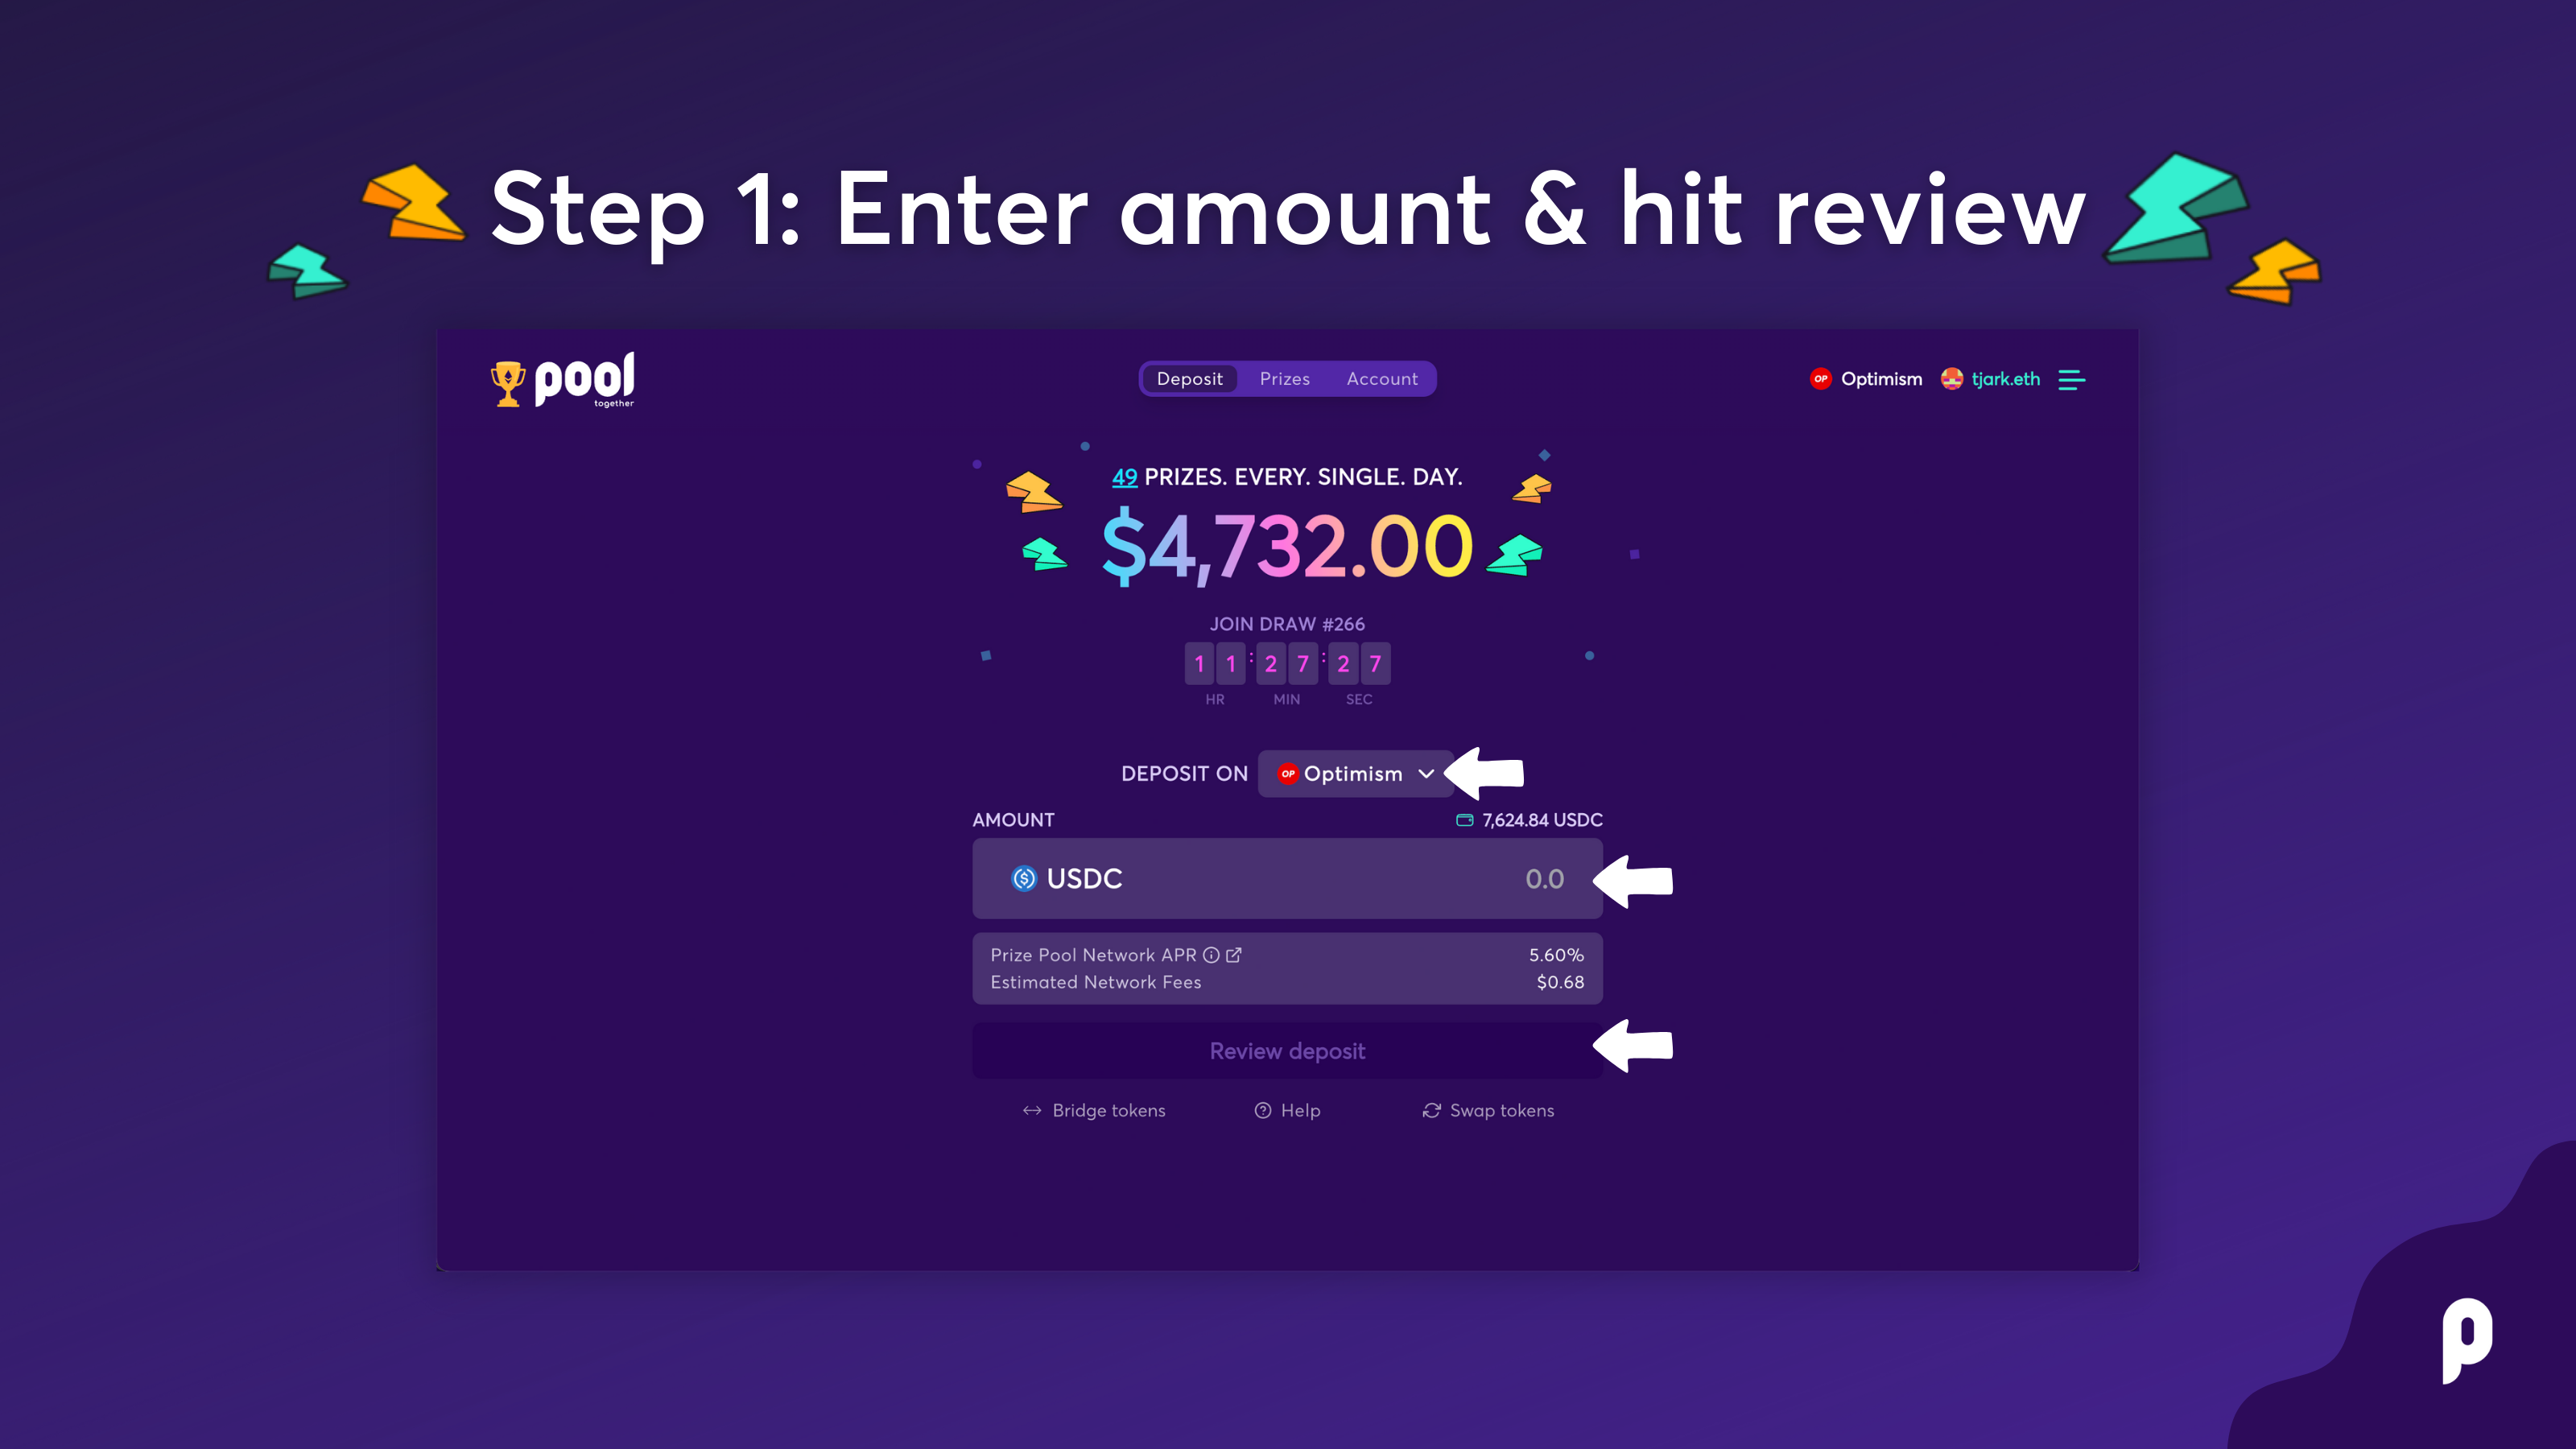 Step: 1 Enter amount & hit review